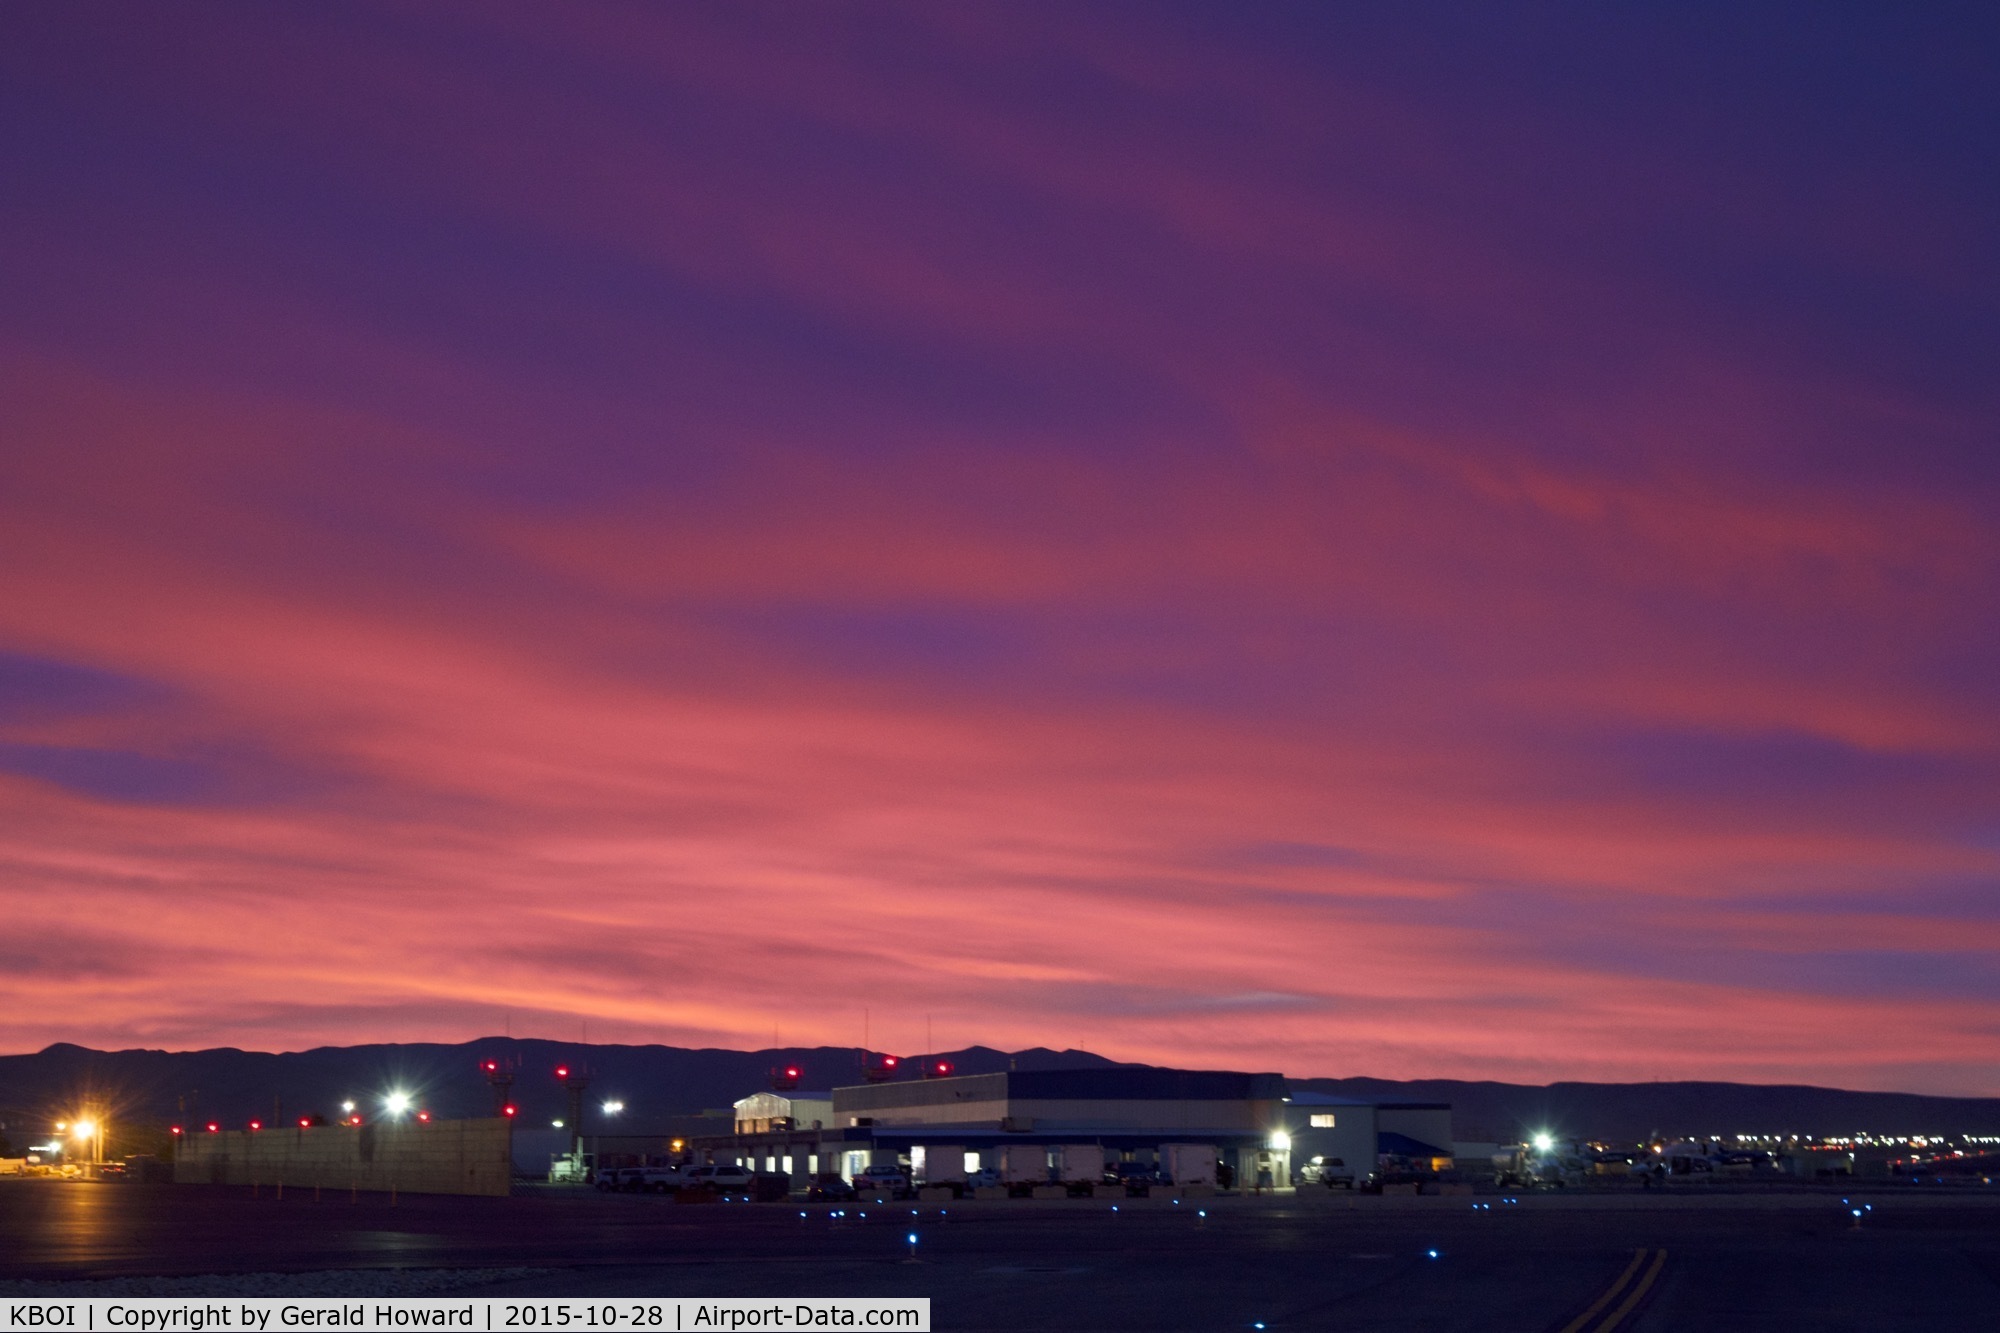 Boise Air Terminal/gowen Fld Airport (BOI) - Early morning at the airport.